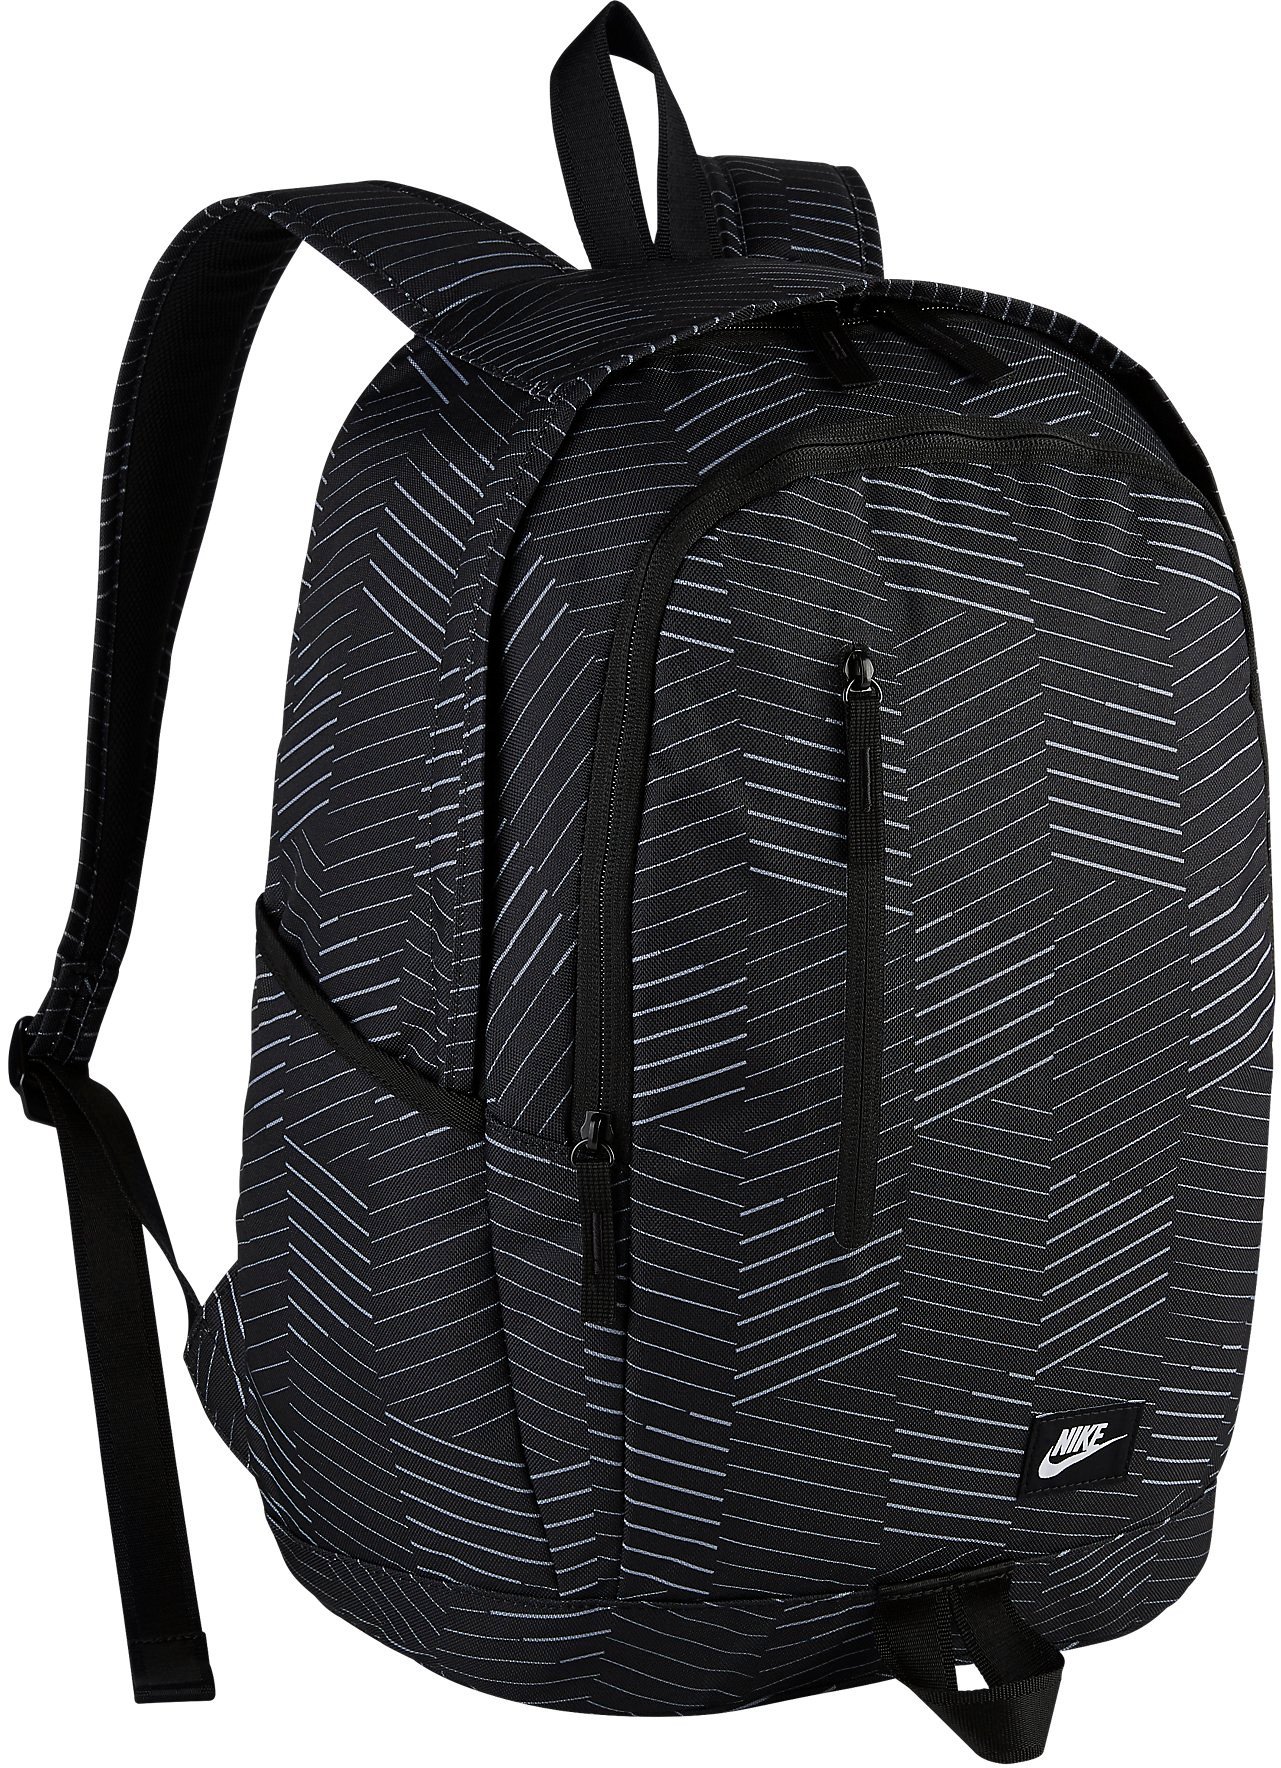 nike all access soleday backpack review